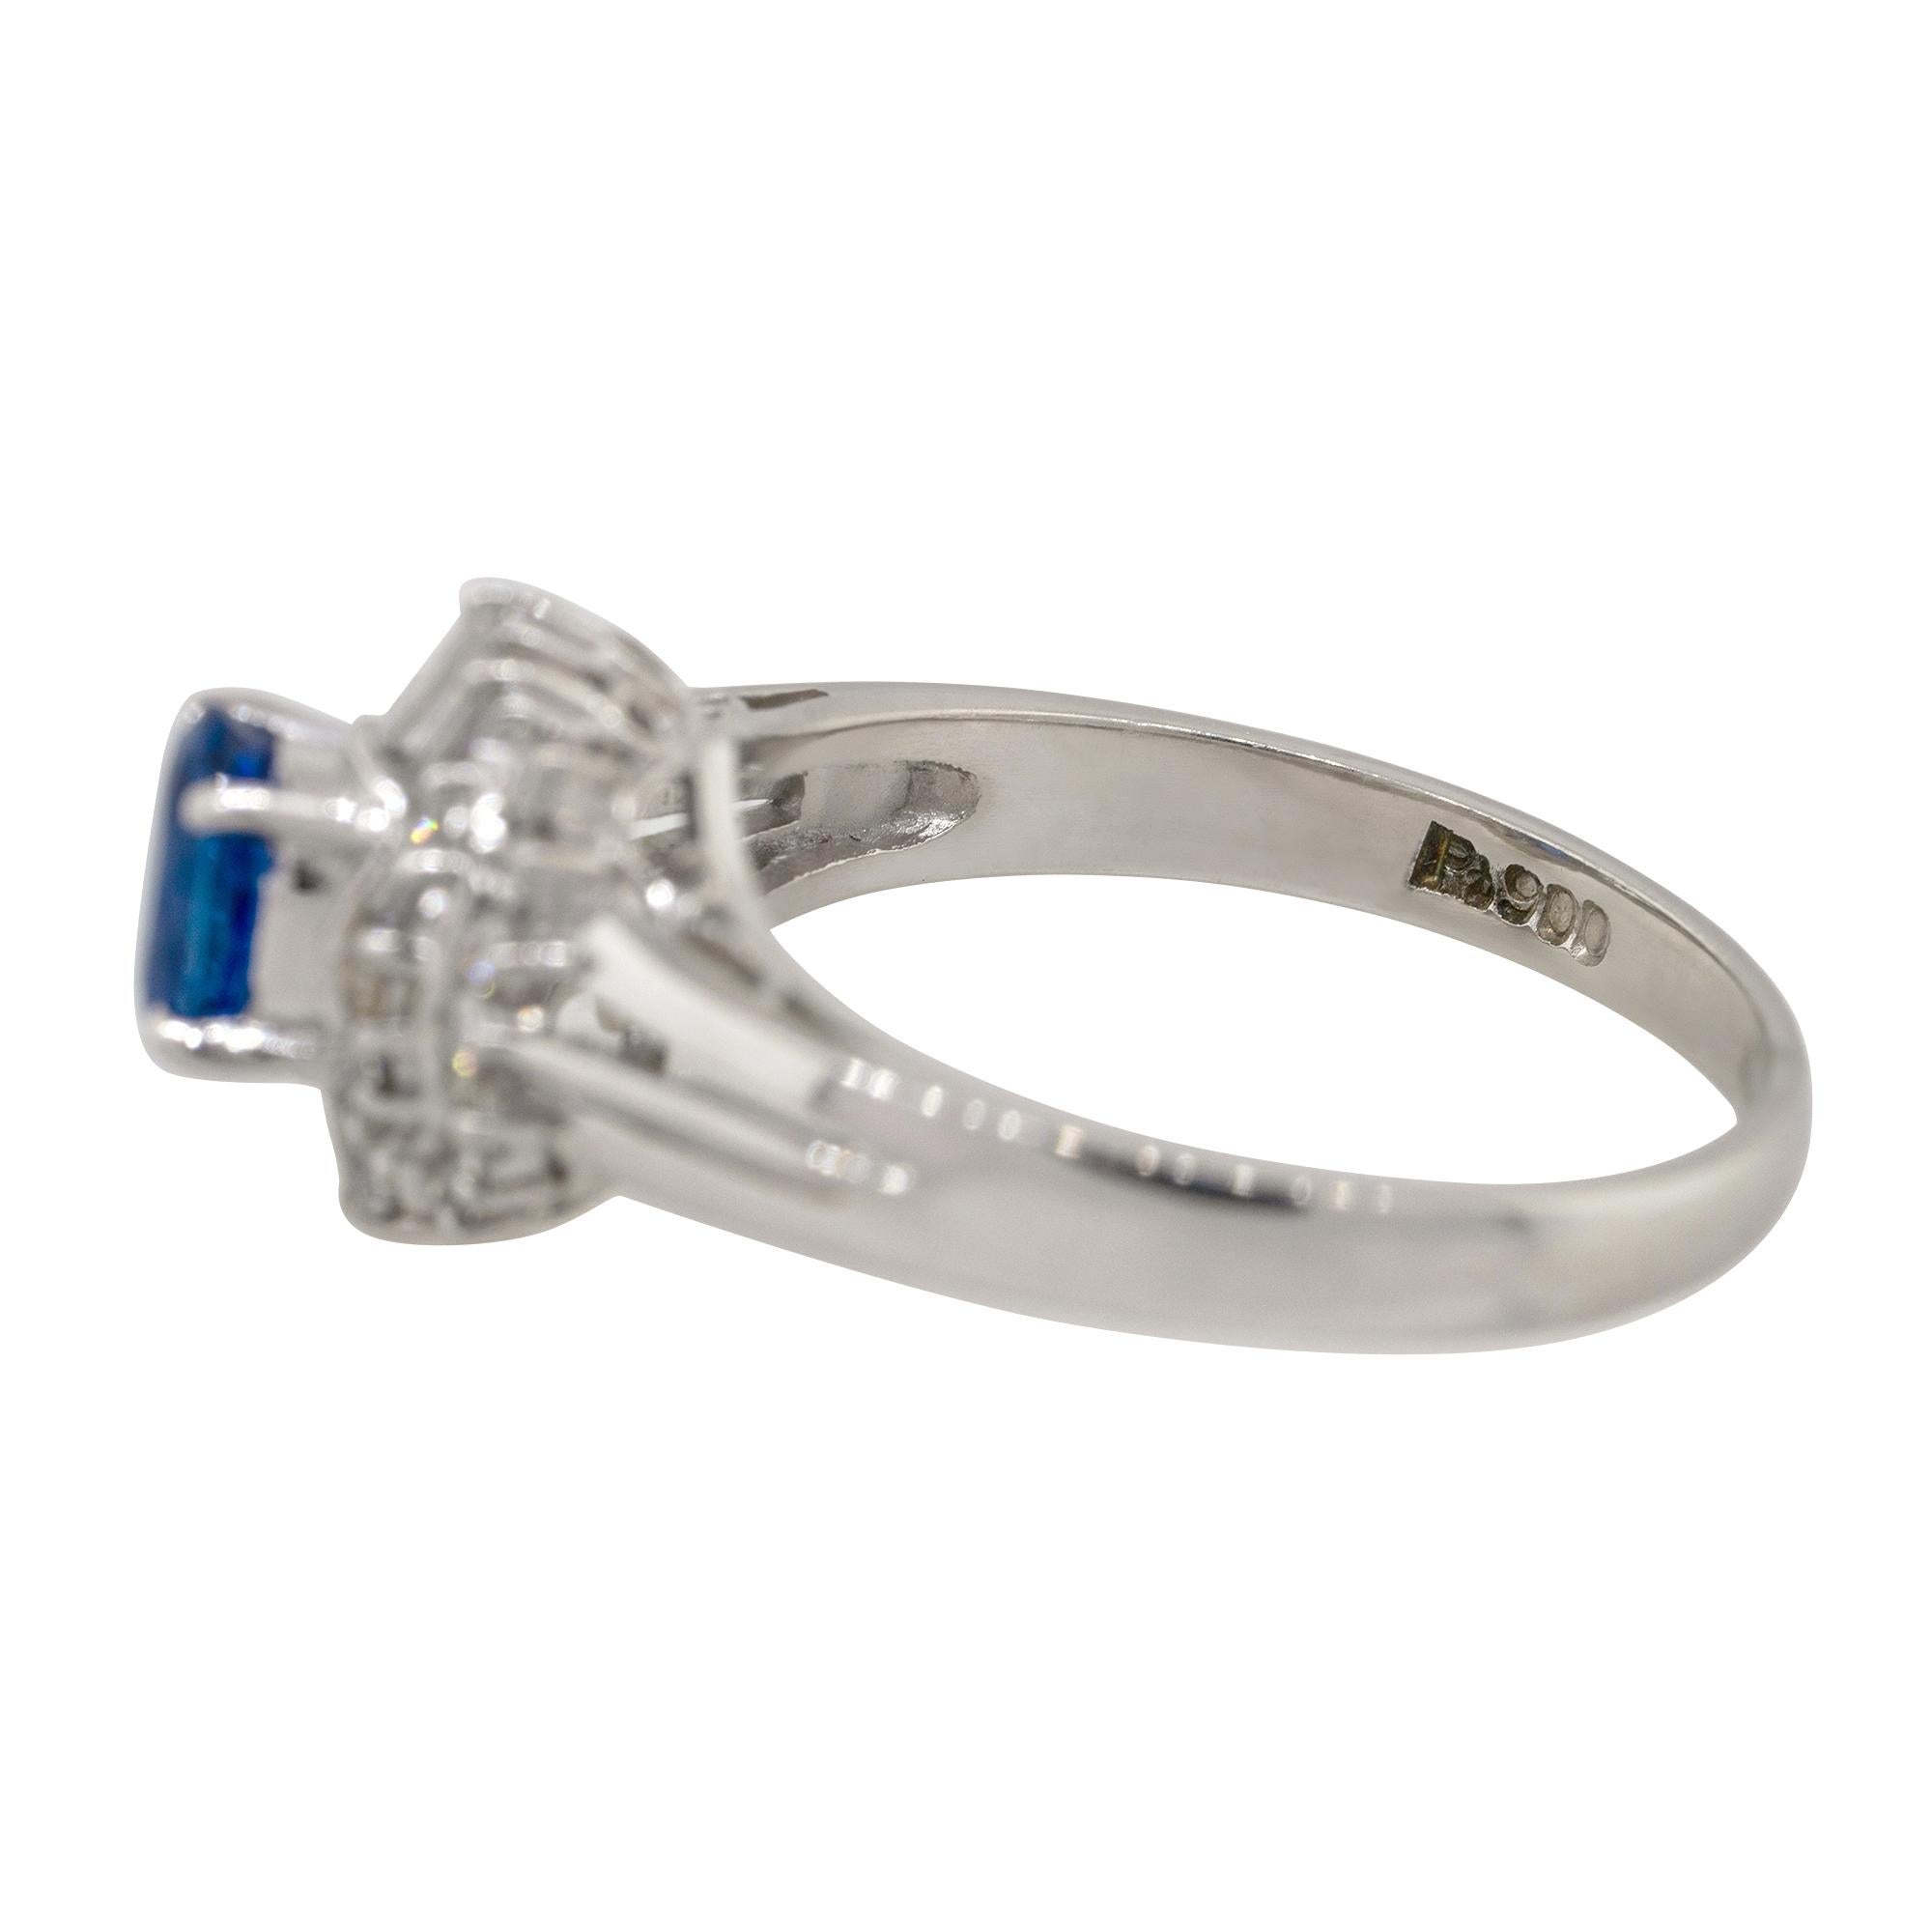 0.52 Carat Oval Sapphire Center Diamond Cocktail Ring Platinum in Stock In New Condition For Sale In Boca Raton, FL